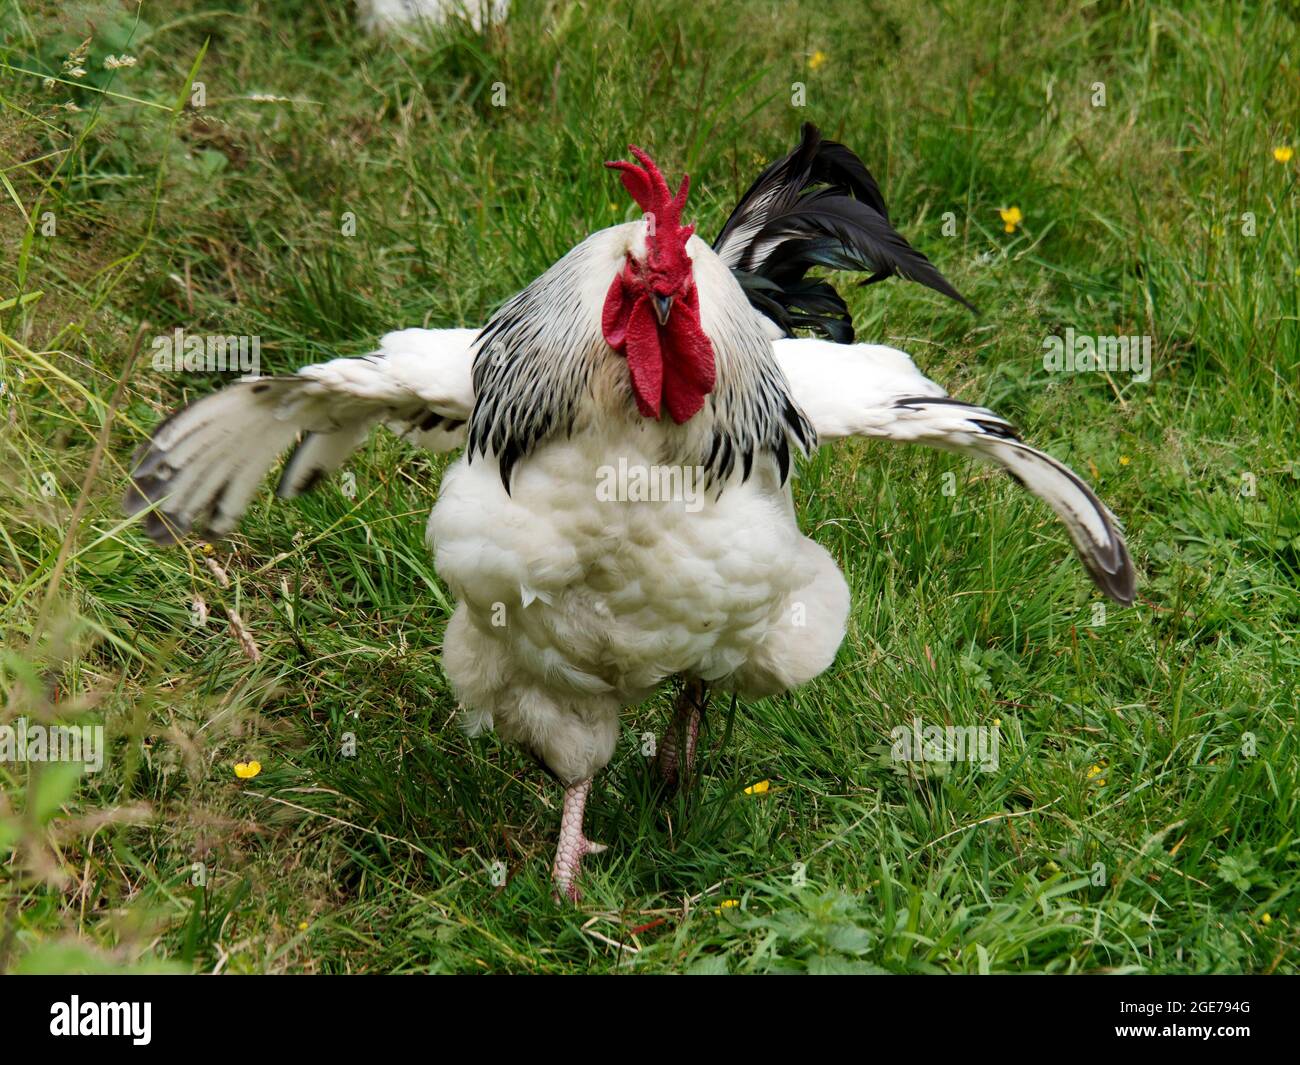 Light Sussex cockerel or rooster in a grass chicken run. Light Sussex are a dual purpose (egg and meat) chicken dating from Roman times. Stock Photo